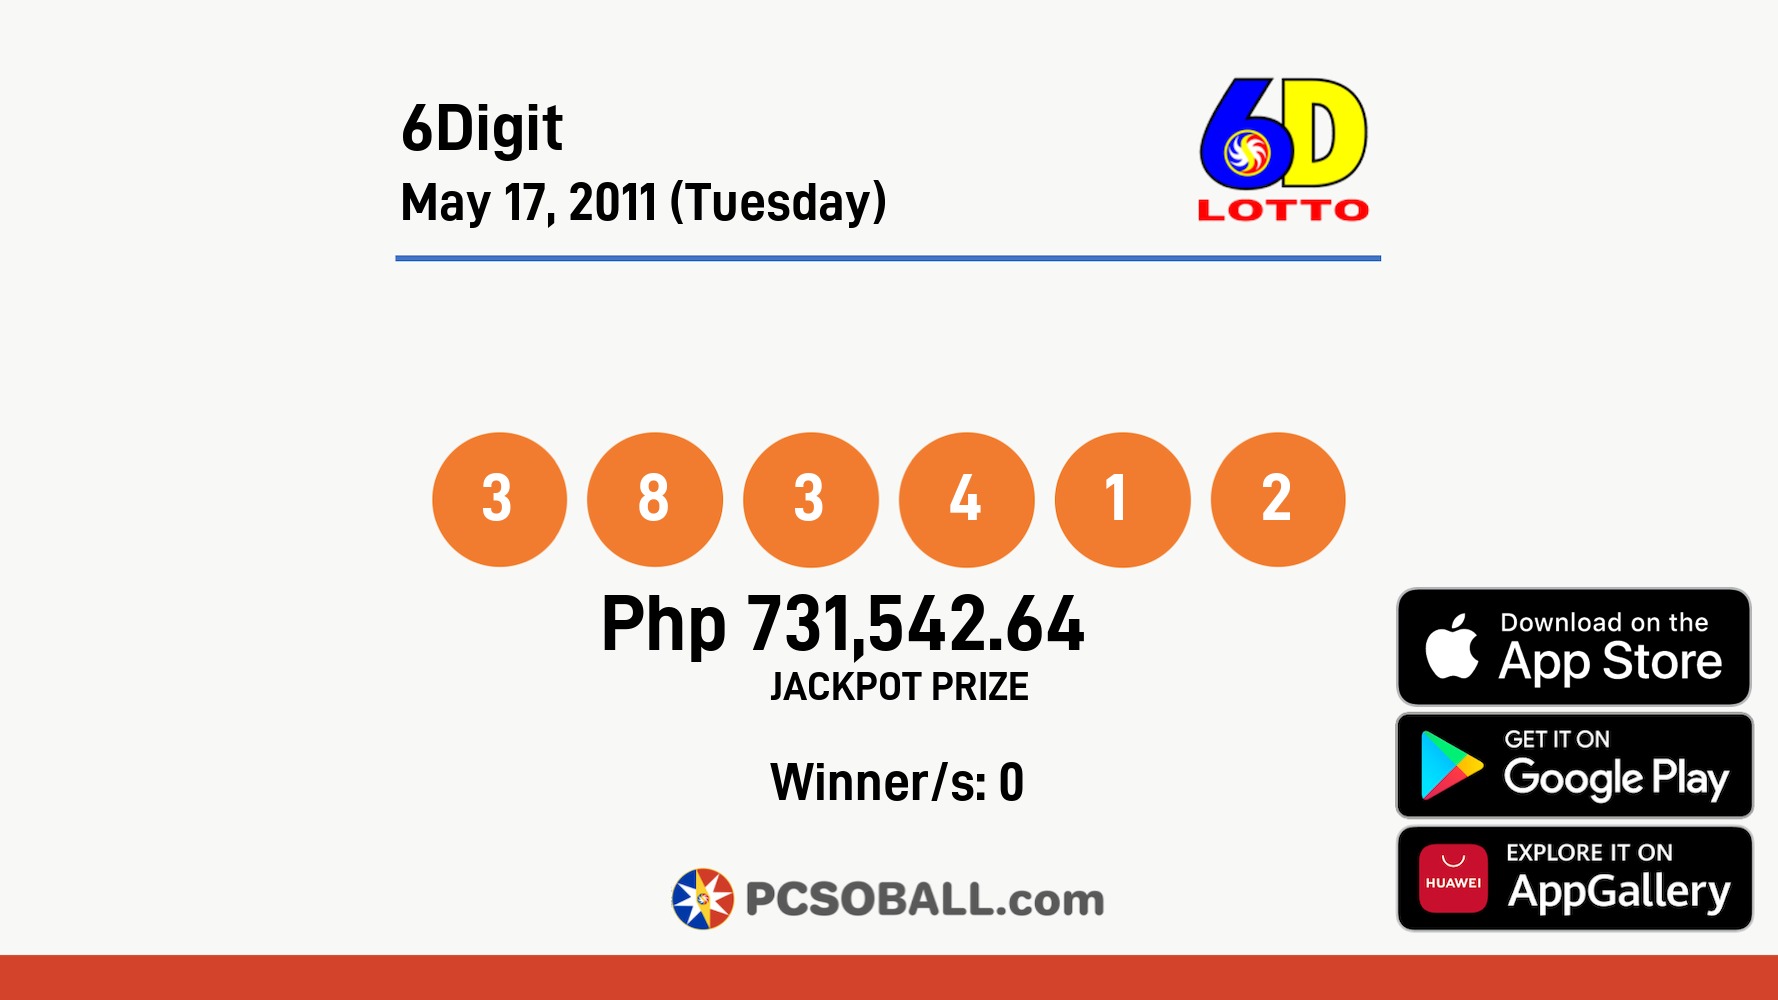 6Digit May 17, 2011 (Tuesday) Result